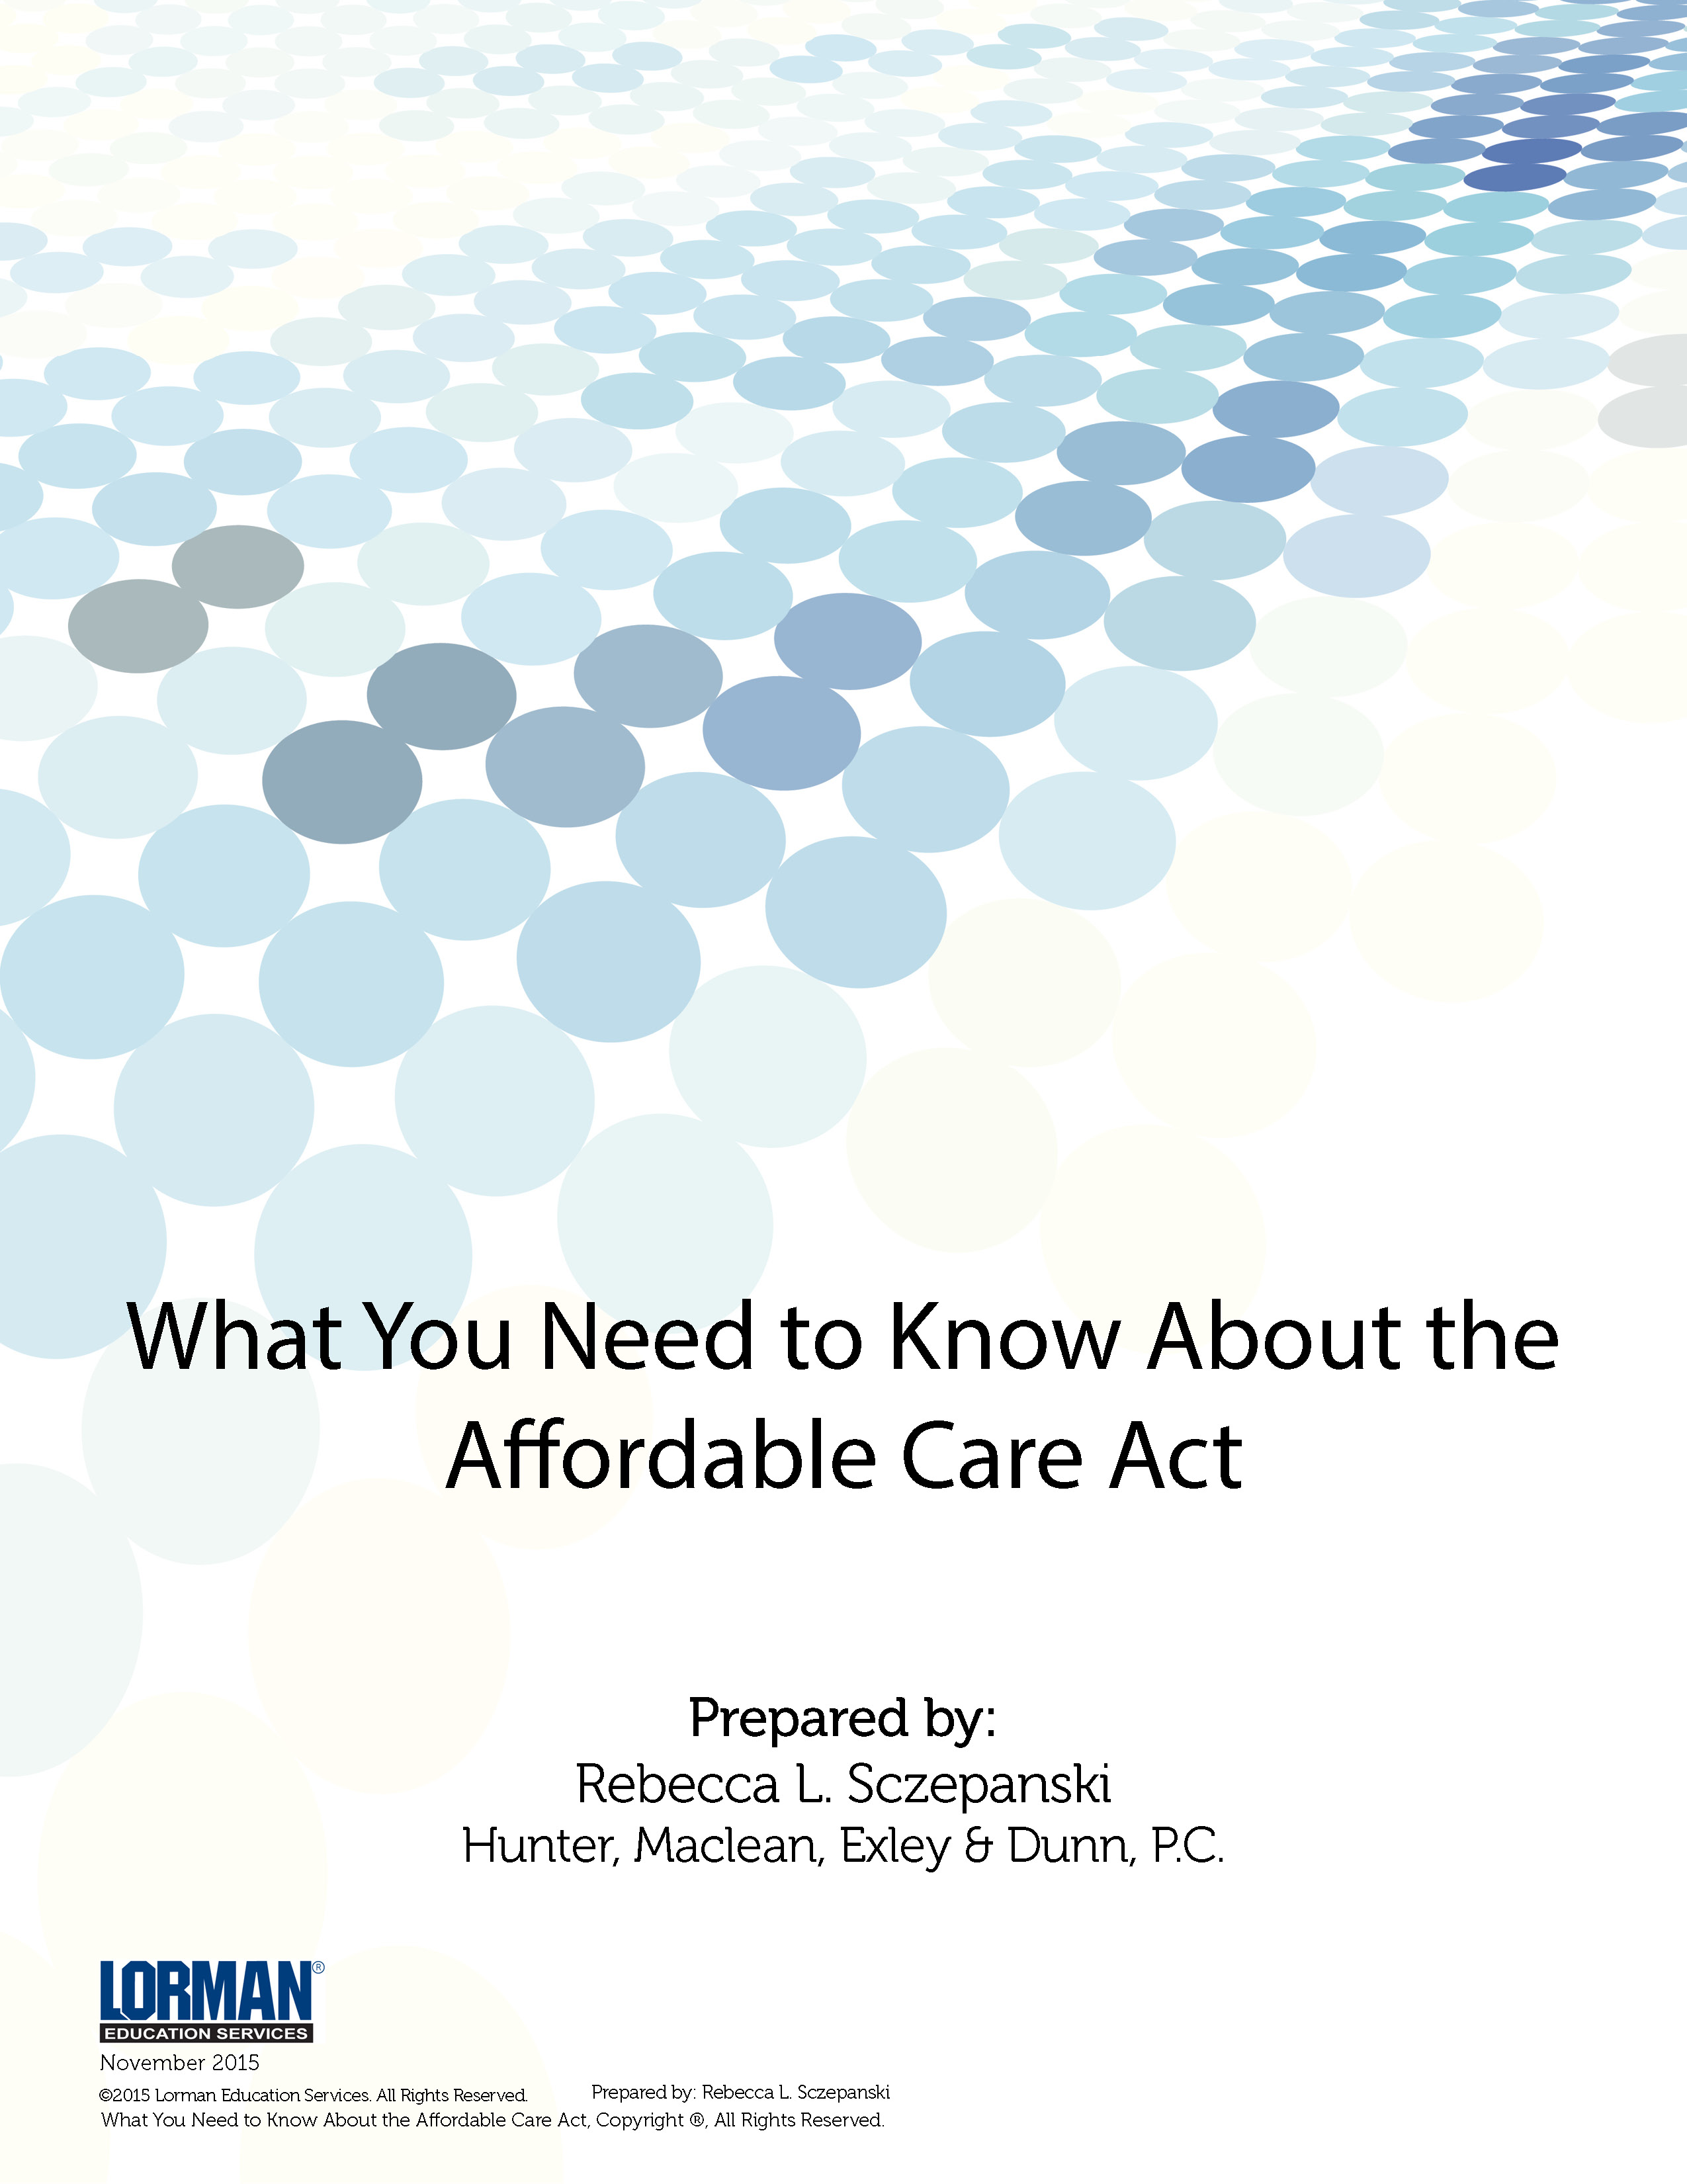 What You Need to Know About the Affordable Care Act